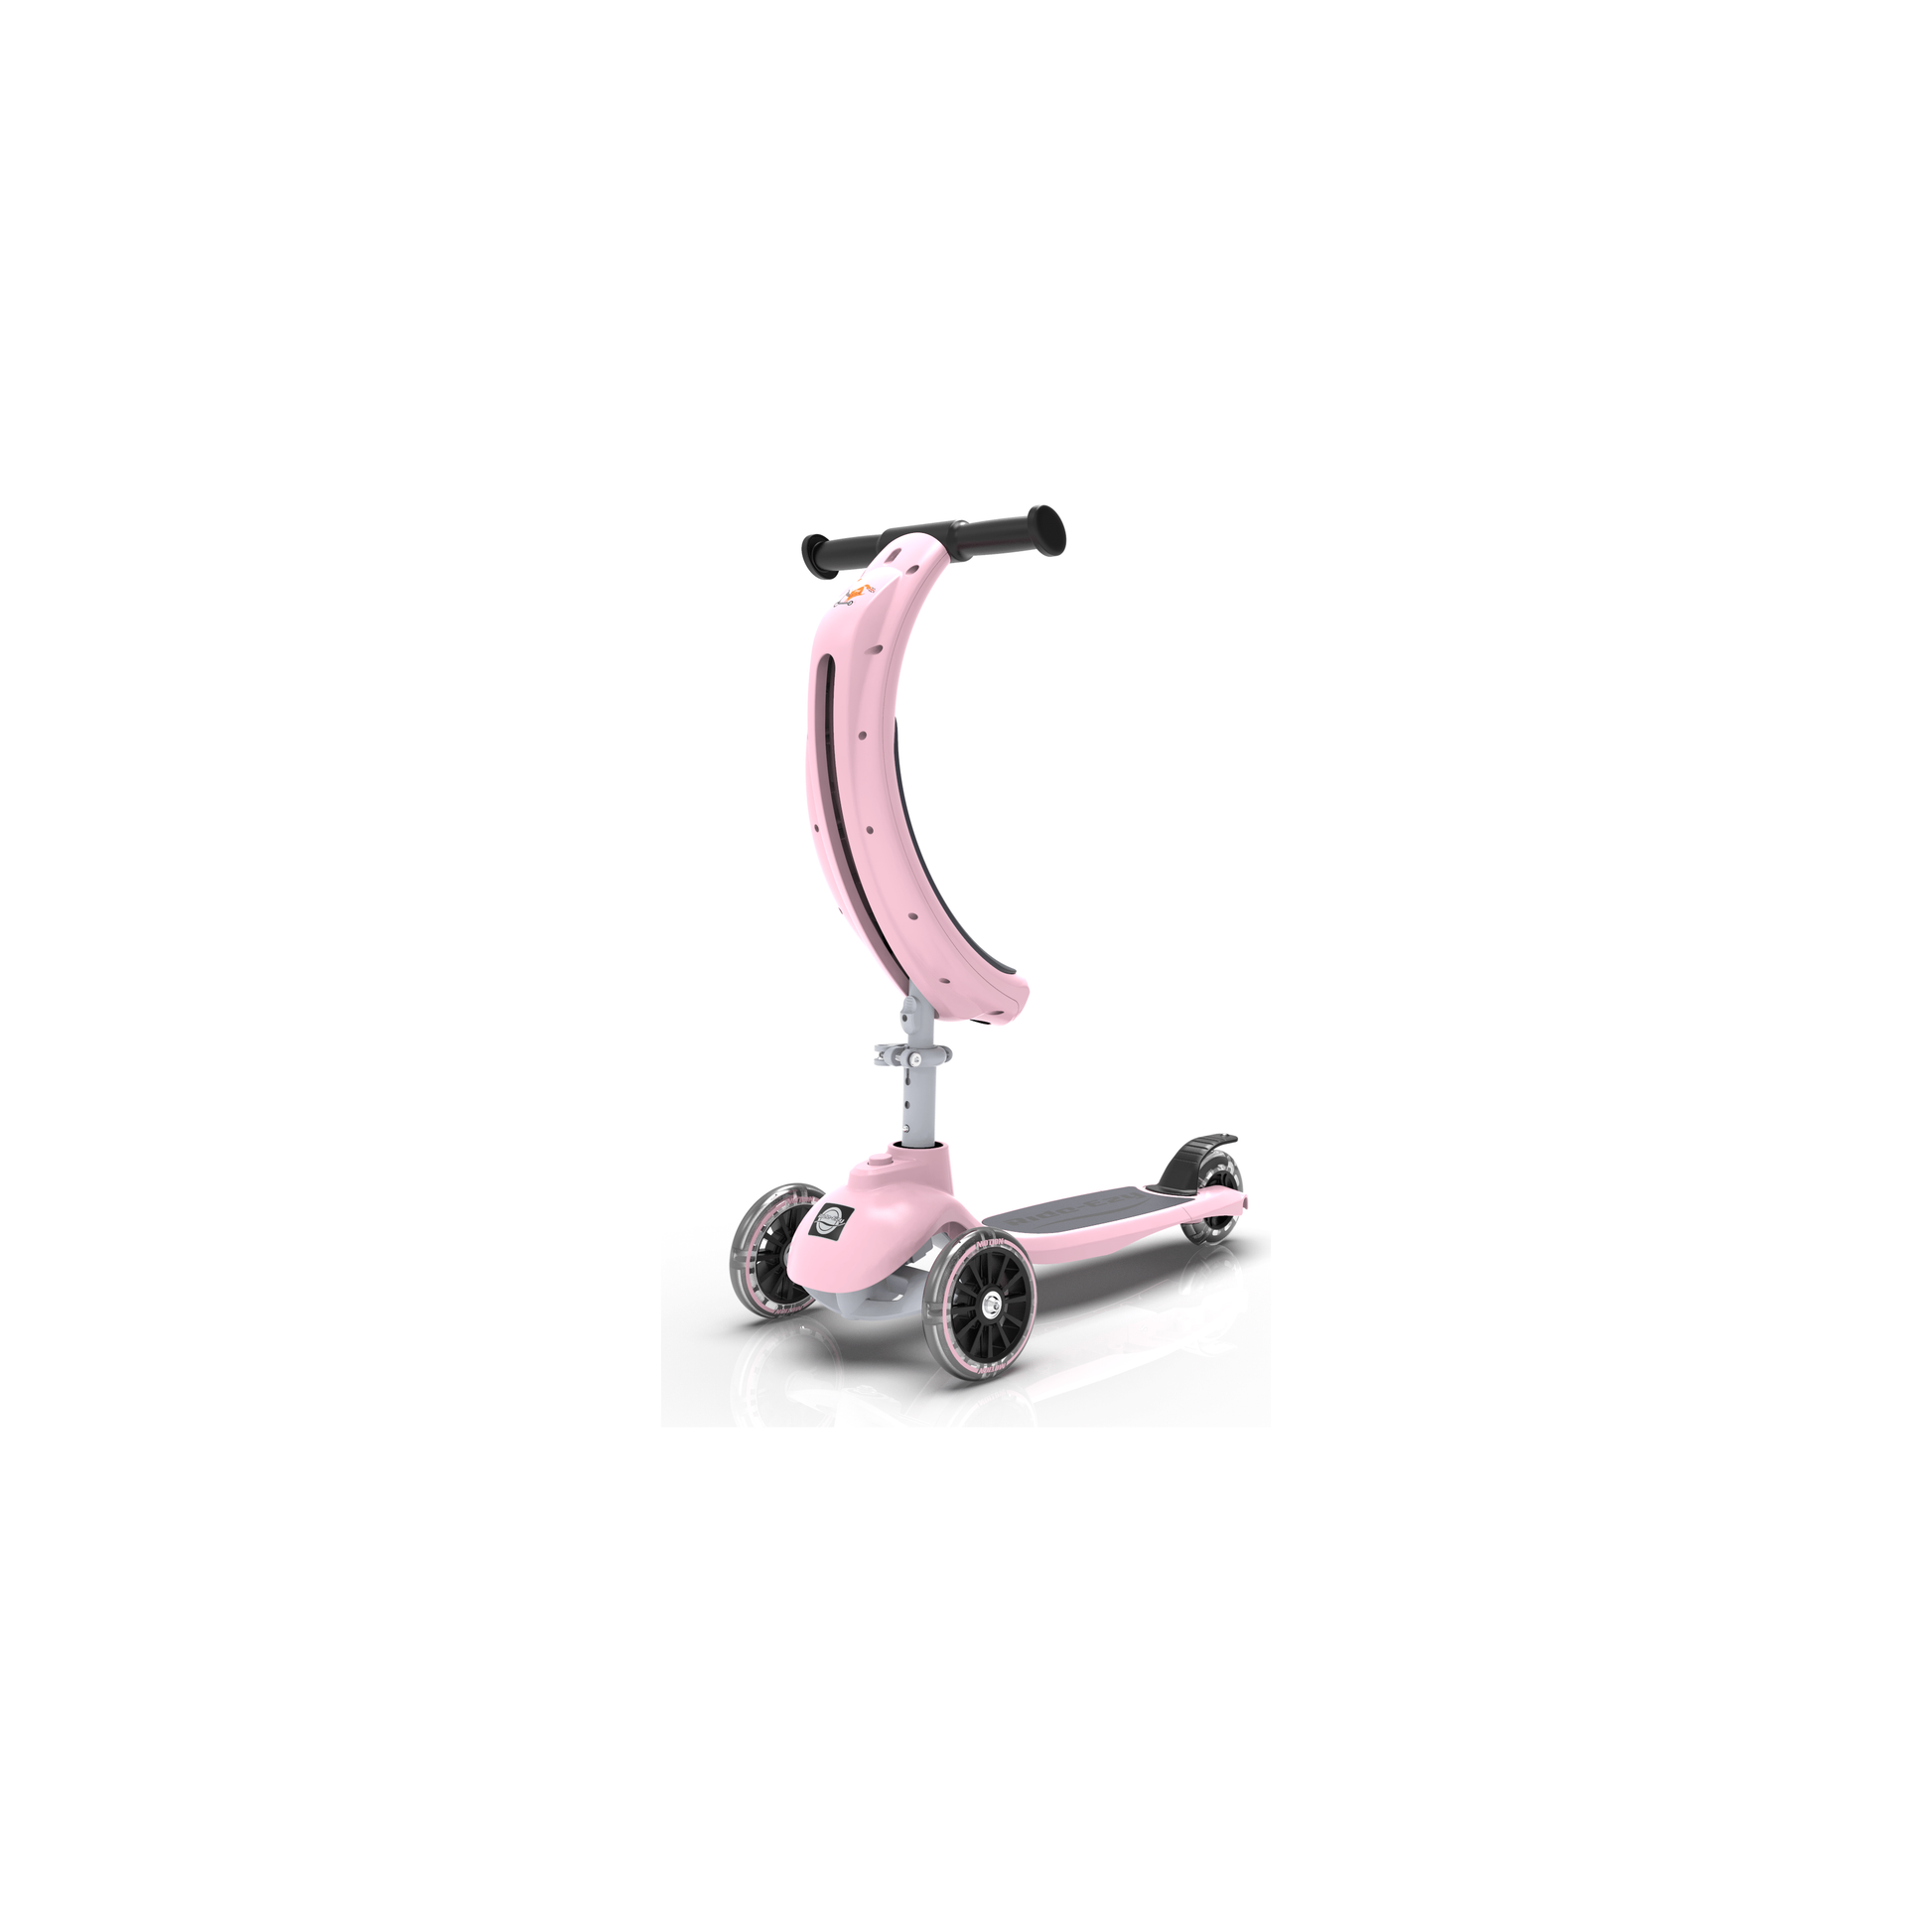 Ride-Ezy Kick & Go Scooter - Blossom stage 1 front left